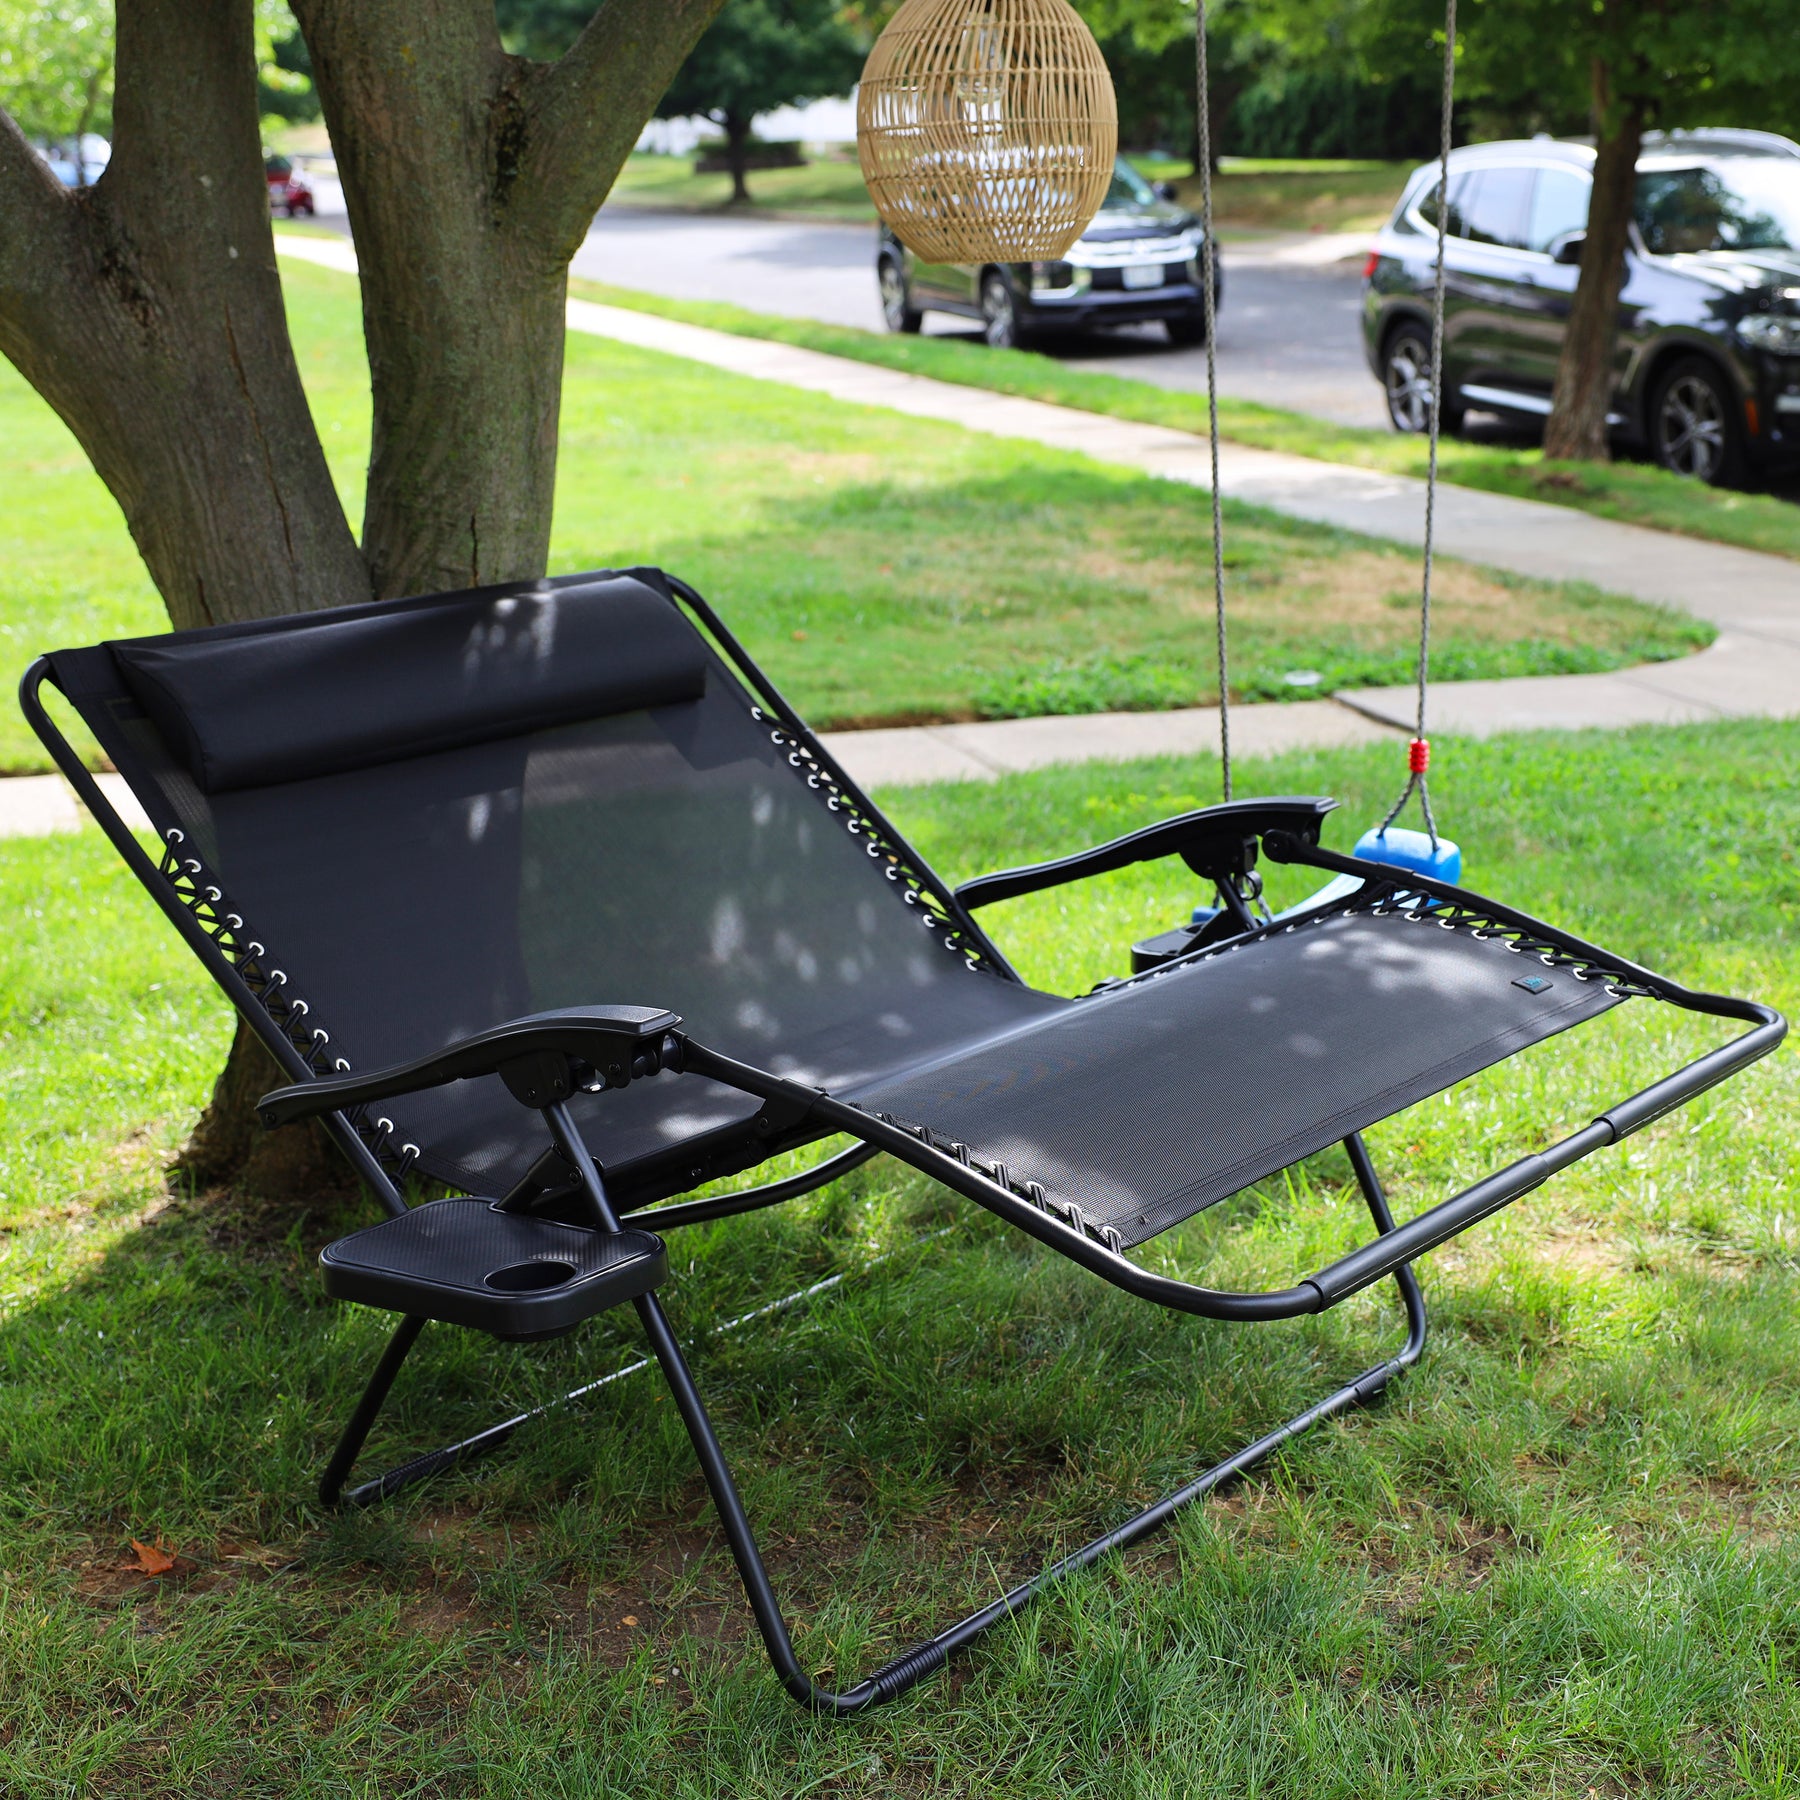 45-inch 2-Person Black Zero Gravity Chair reclined on a lawn under a tree.